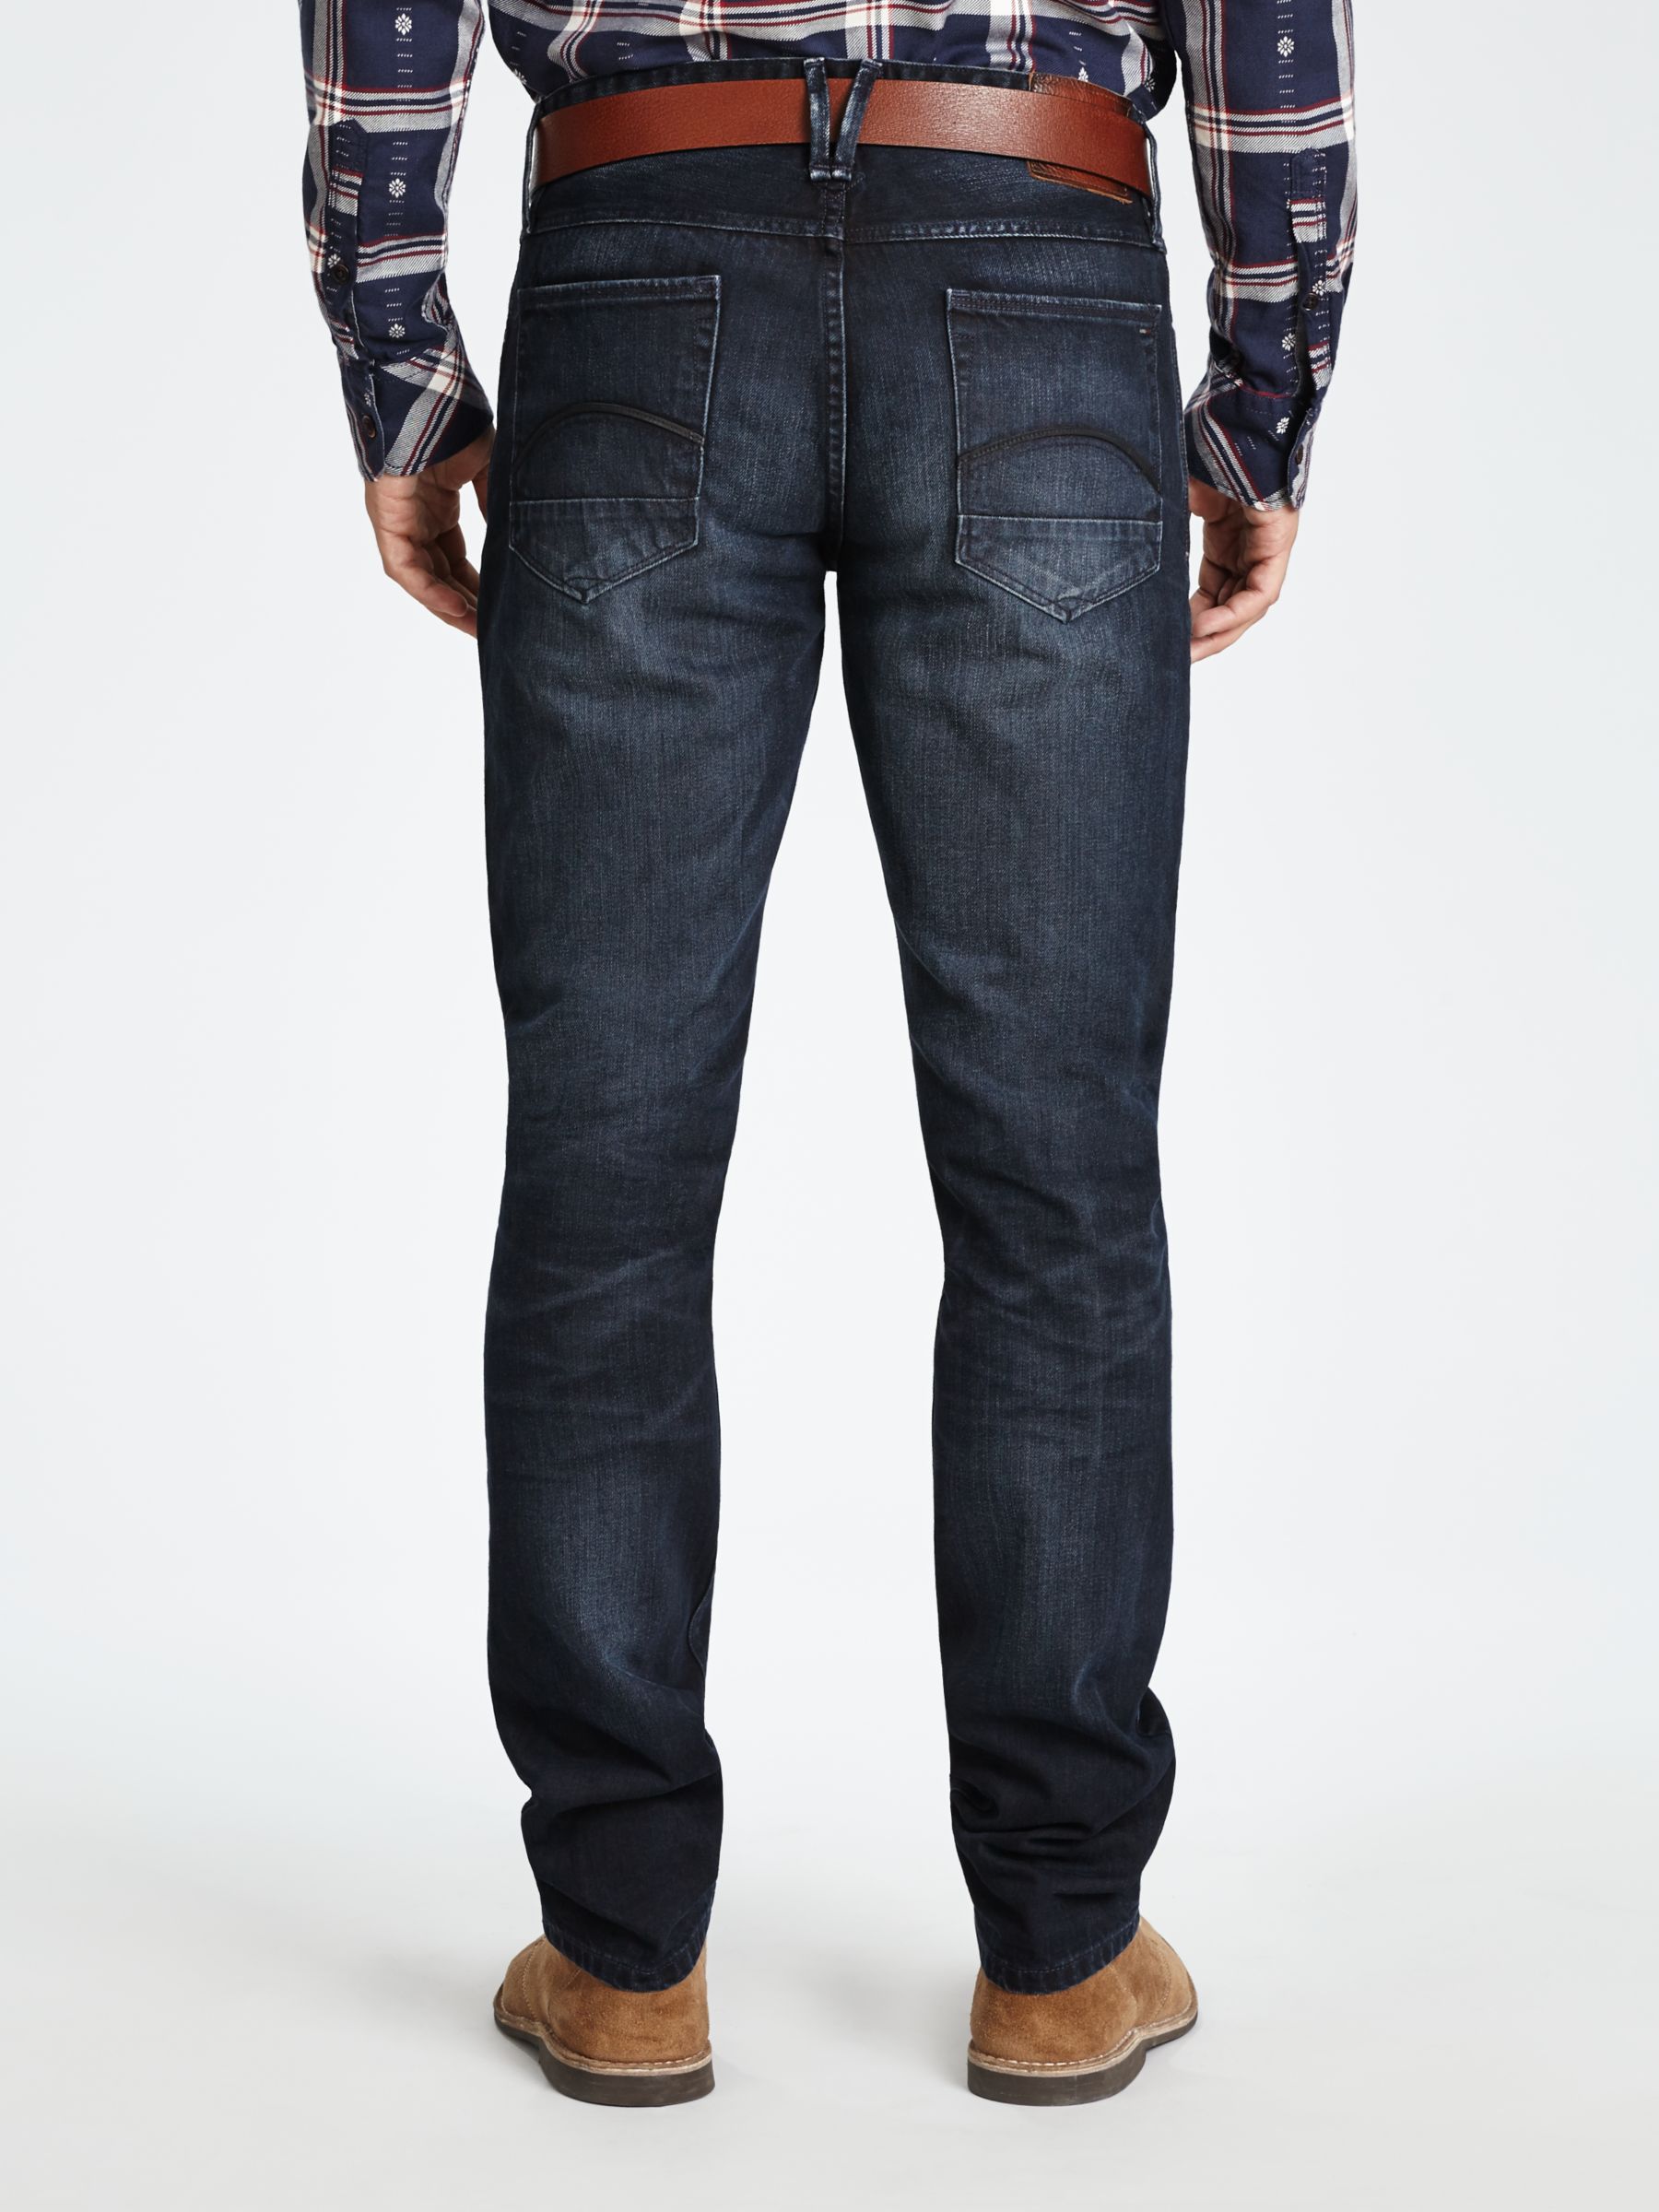 hilfiger ronnie tapered